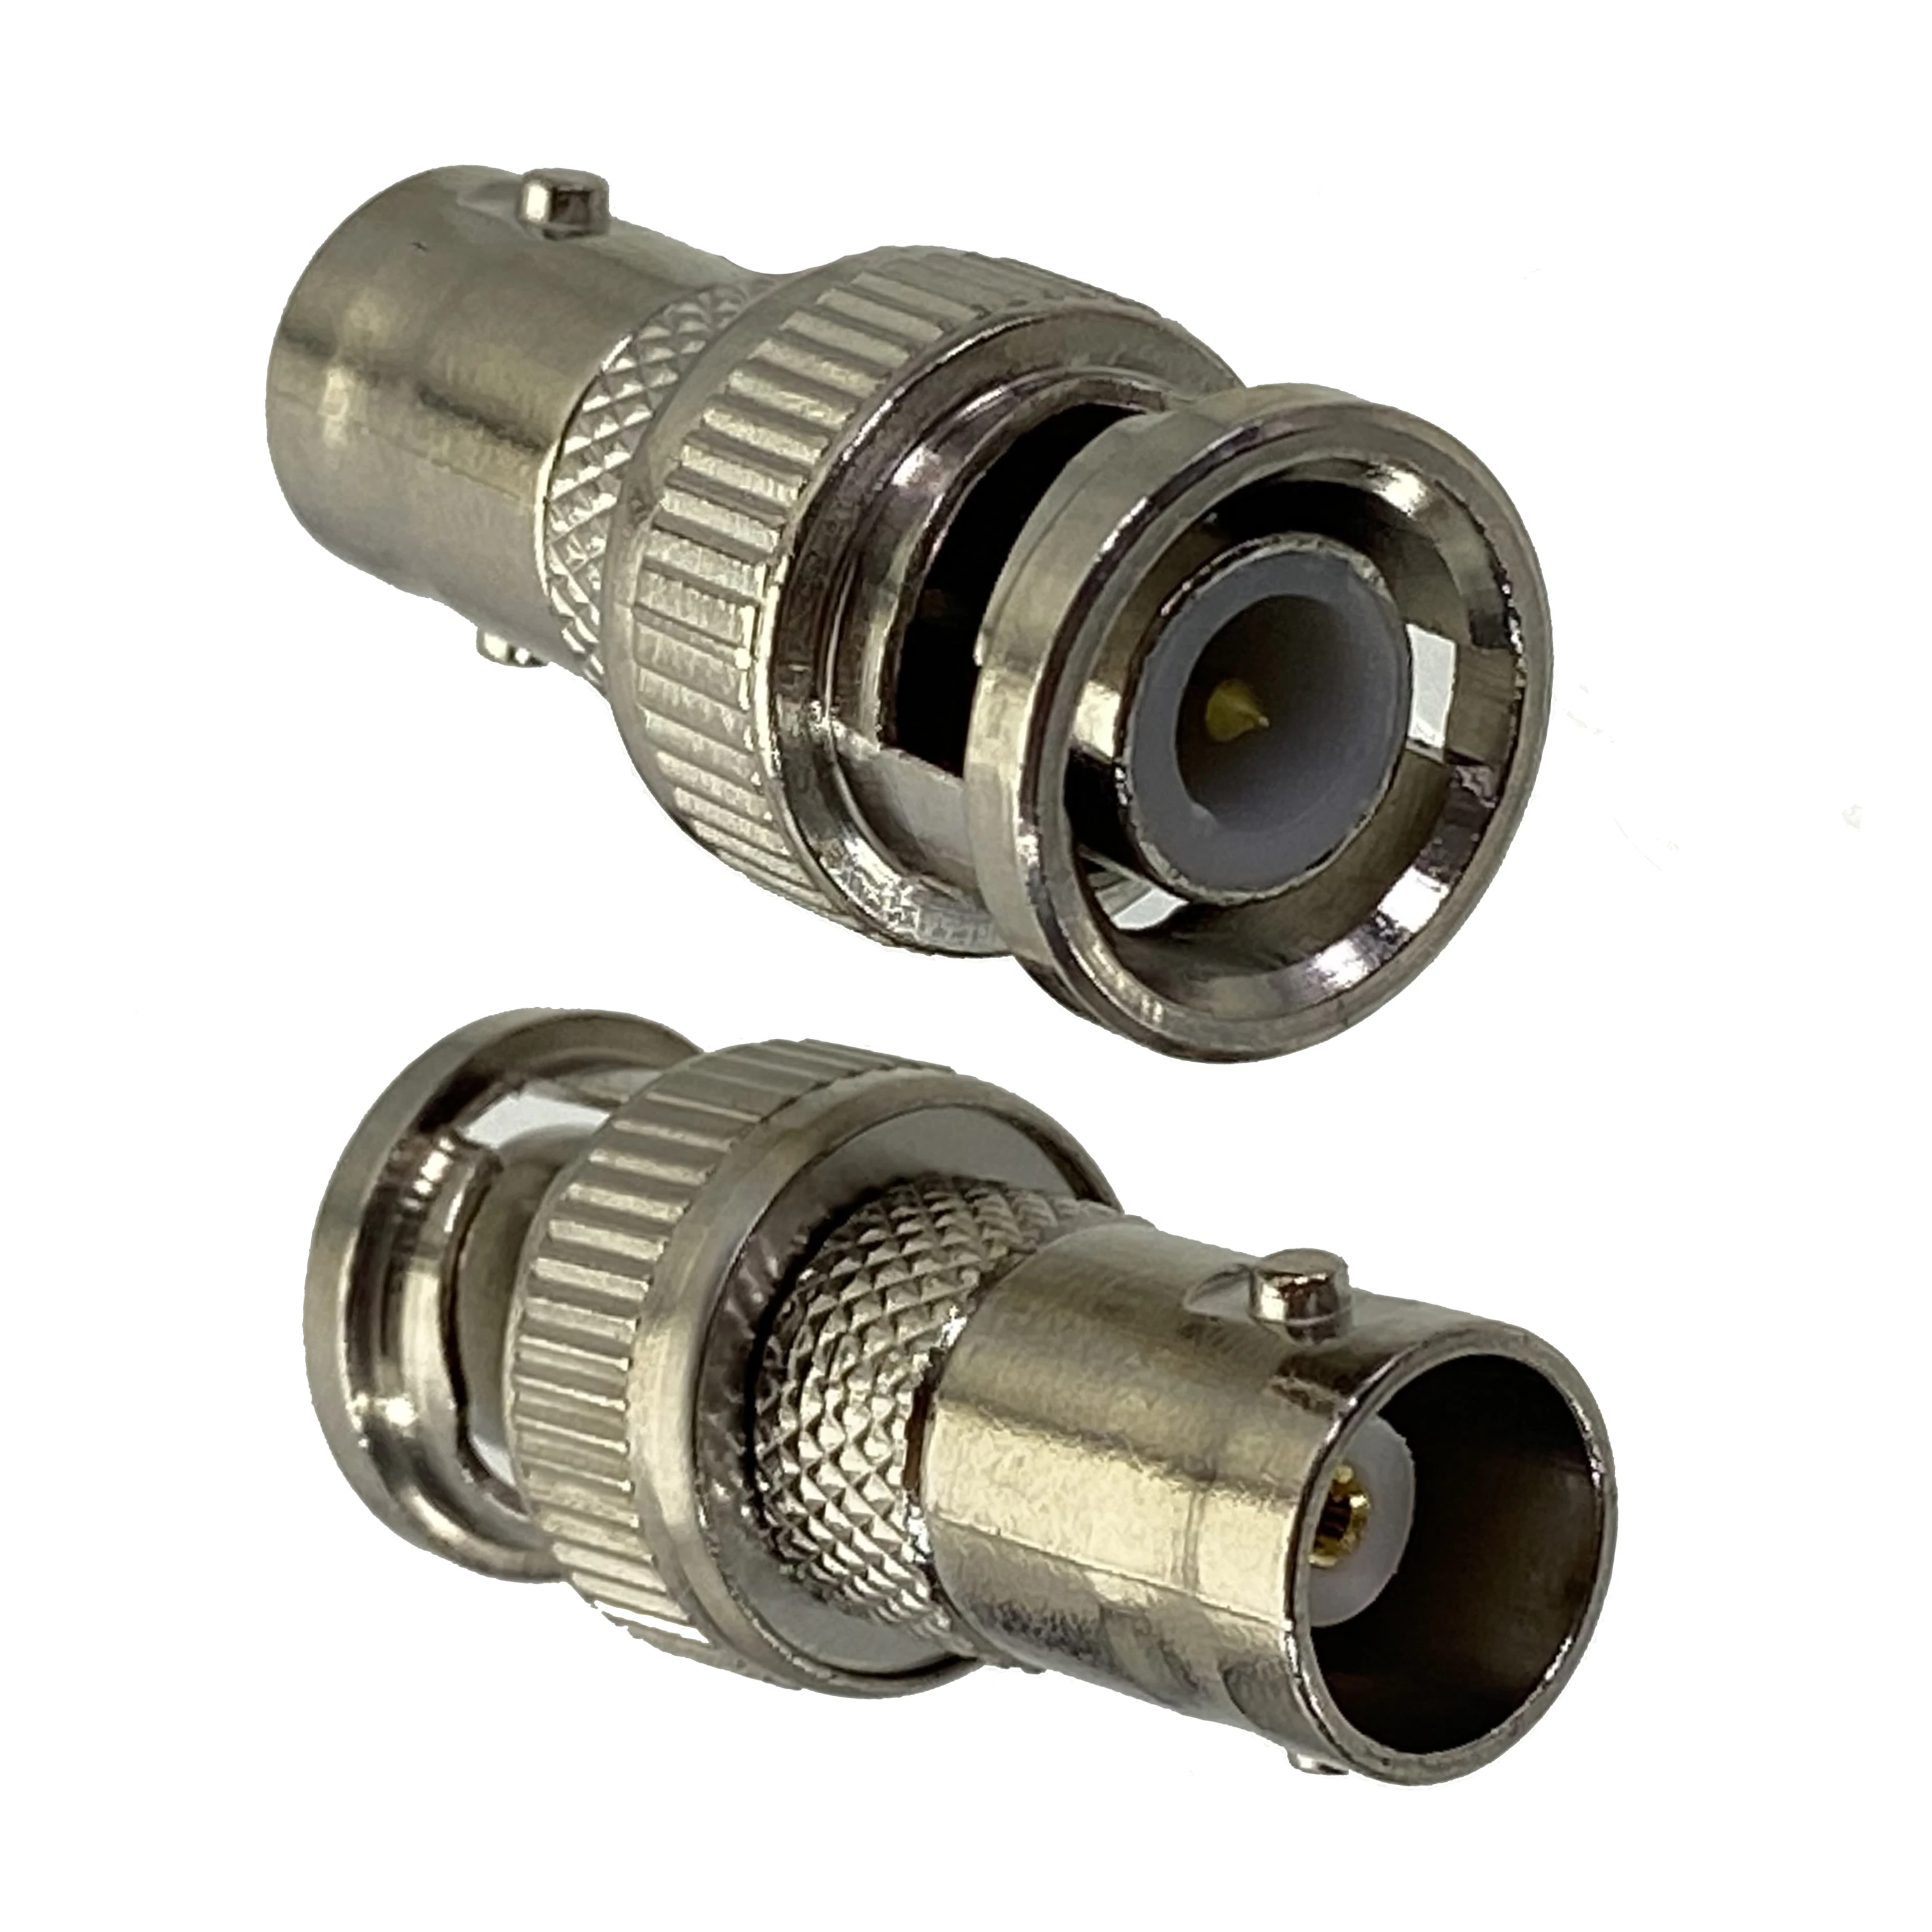 1pcs Connector Adapter BNC Male Plug to BNC Female Jack Straight Wire Terminal RF Coaxial Converter New